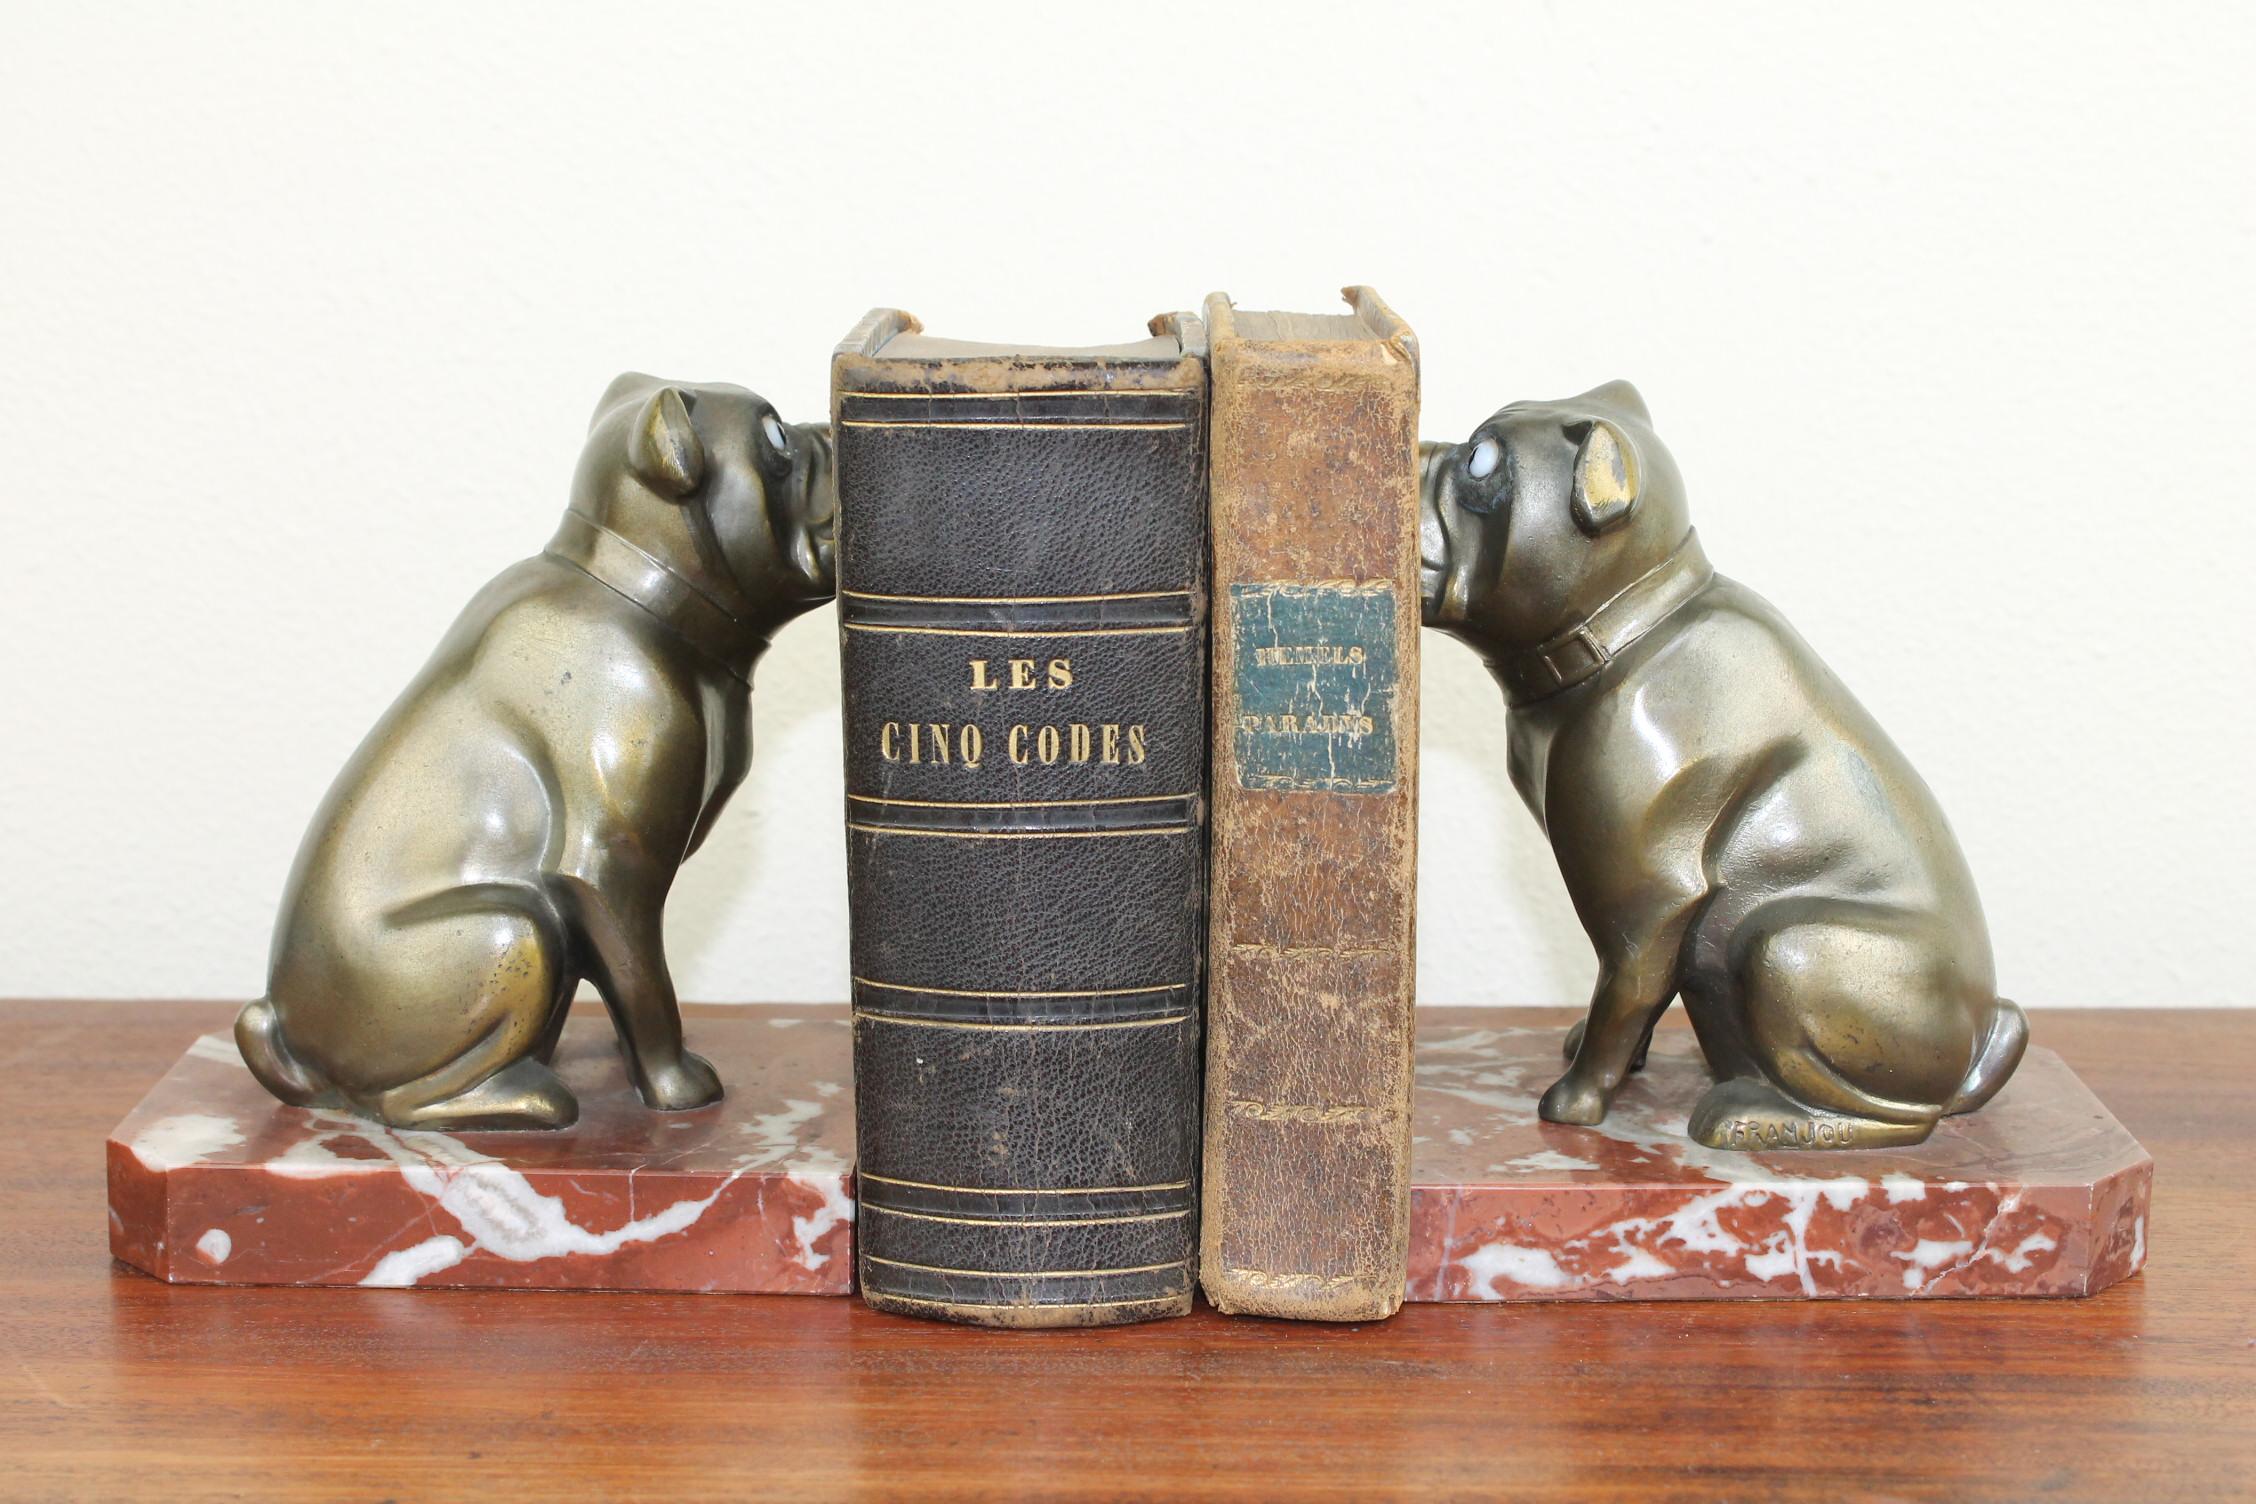 Large size Art Deco figural bookends with French bulldogs by Franjou, France.
Both bookends are signed and for the age still in very good condition.
The bulldog figurines - dog statues have big expressive eyes.
They are made of patinated metal,